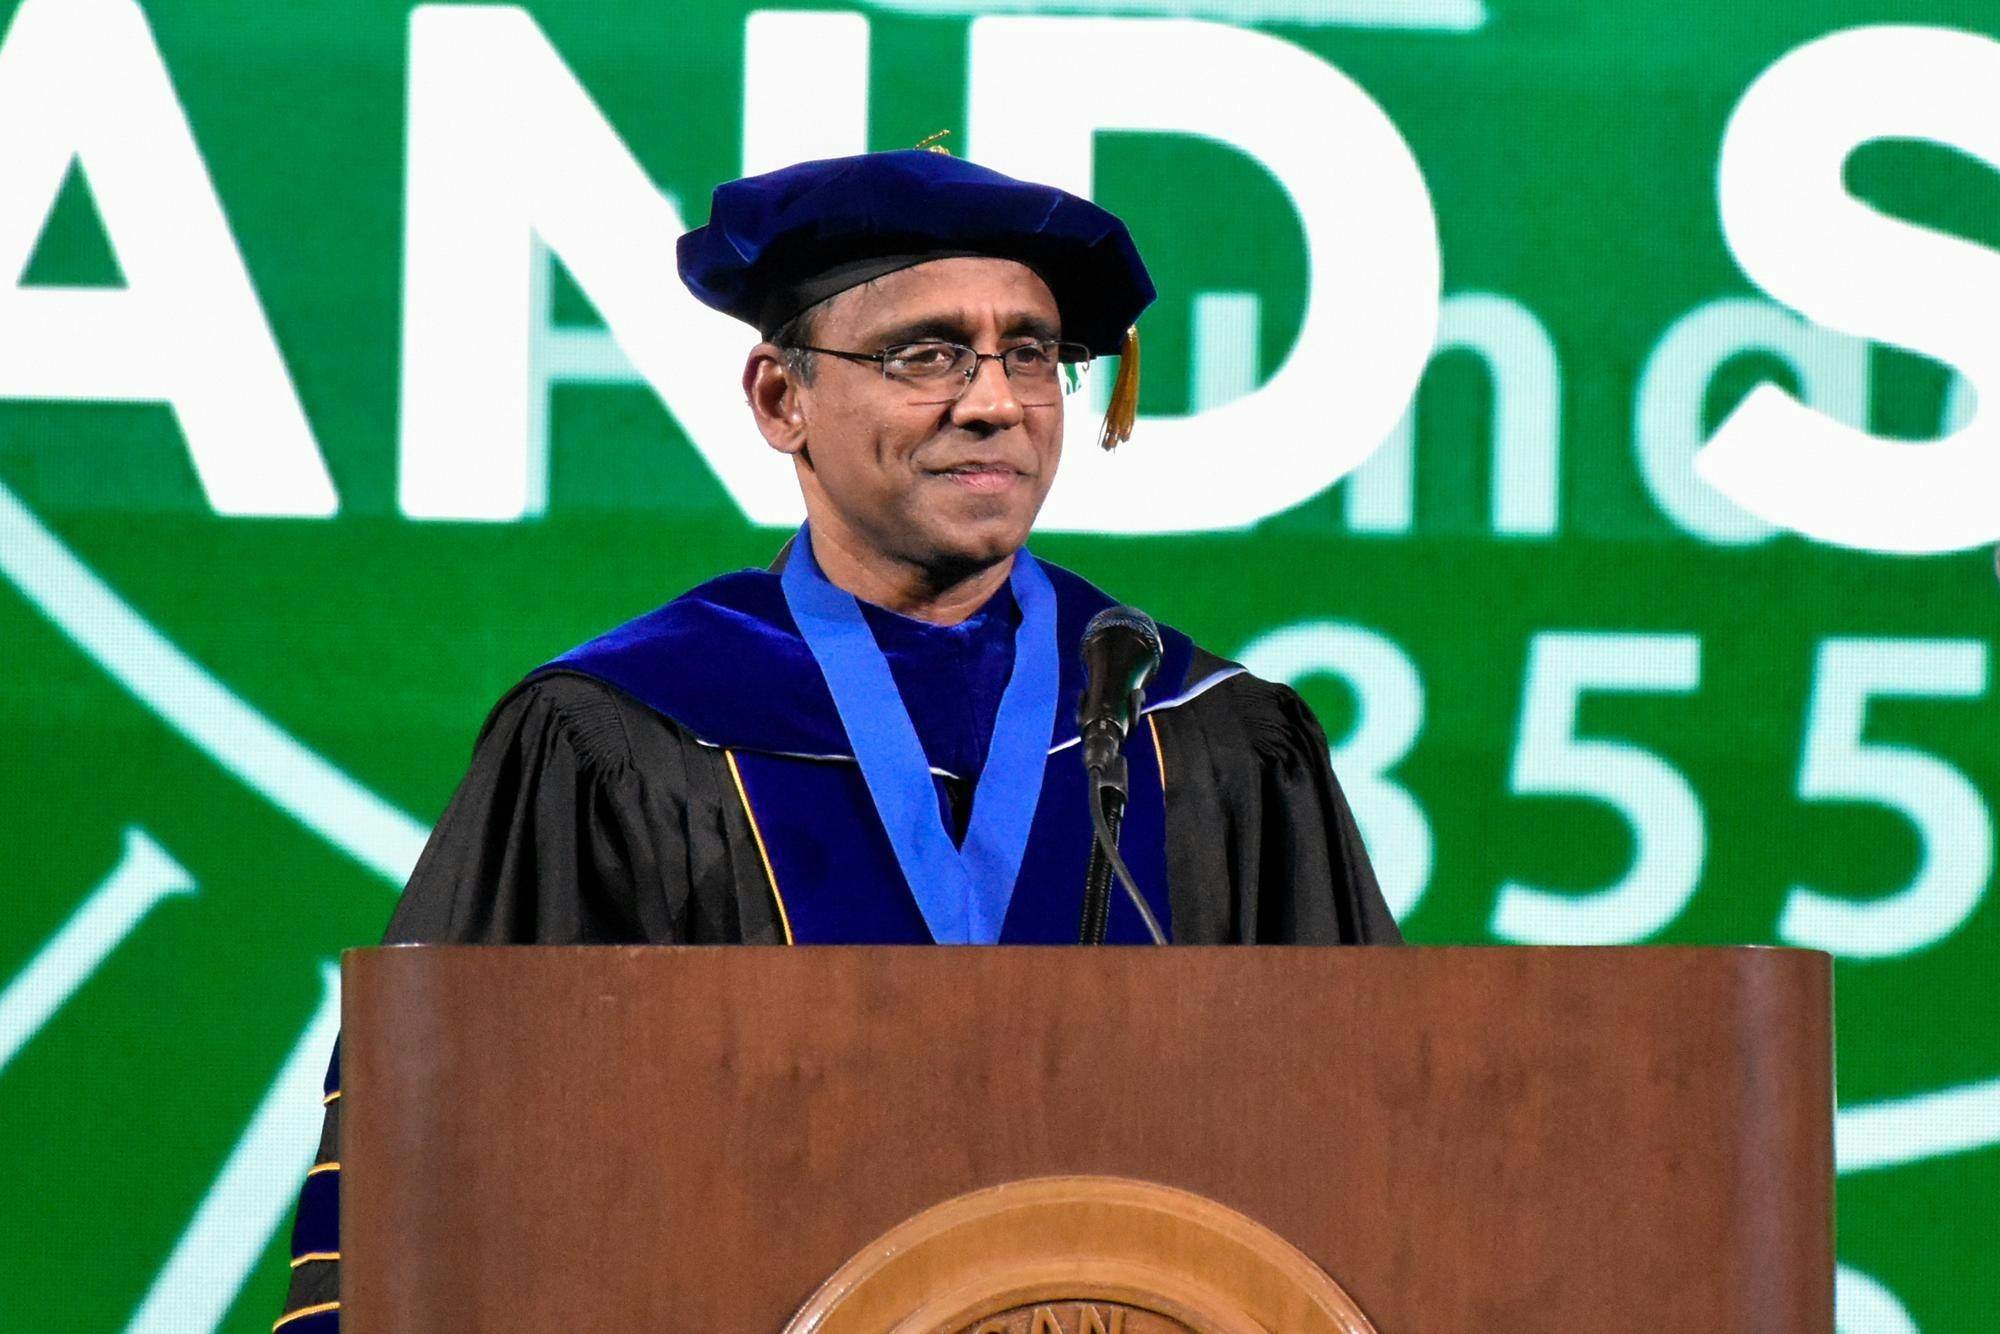 Dean Prabu David speaks at the College of Communication Arts and Sciences commencement ceremony on May 5, 2023.